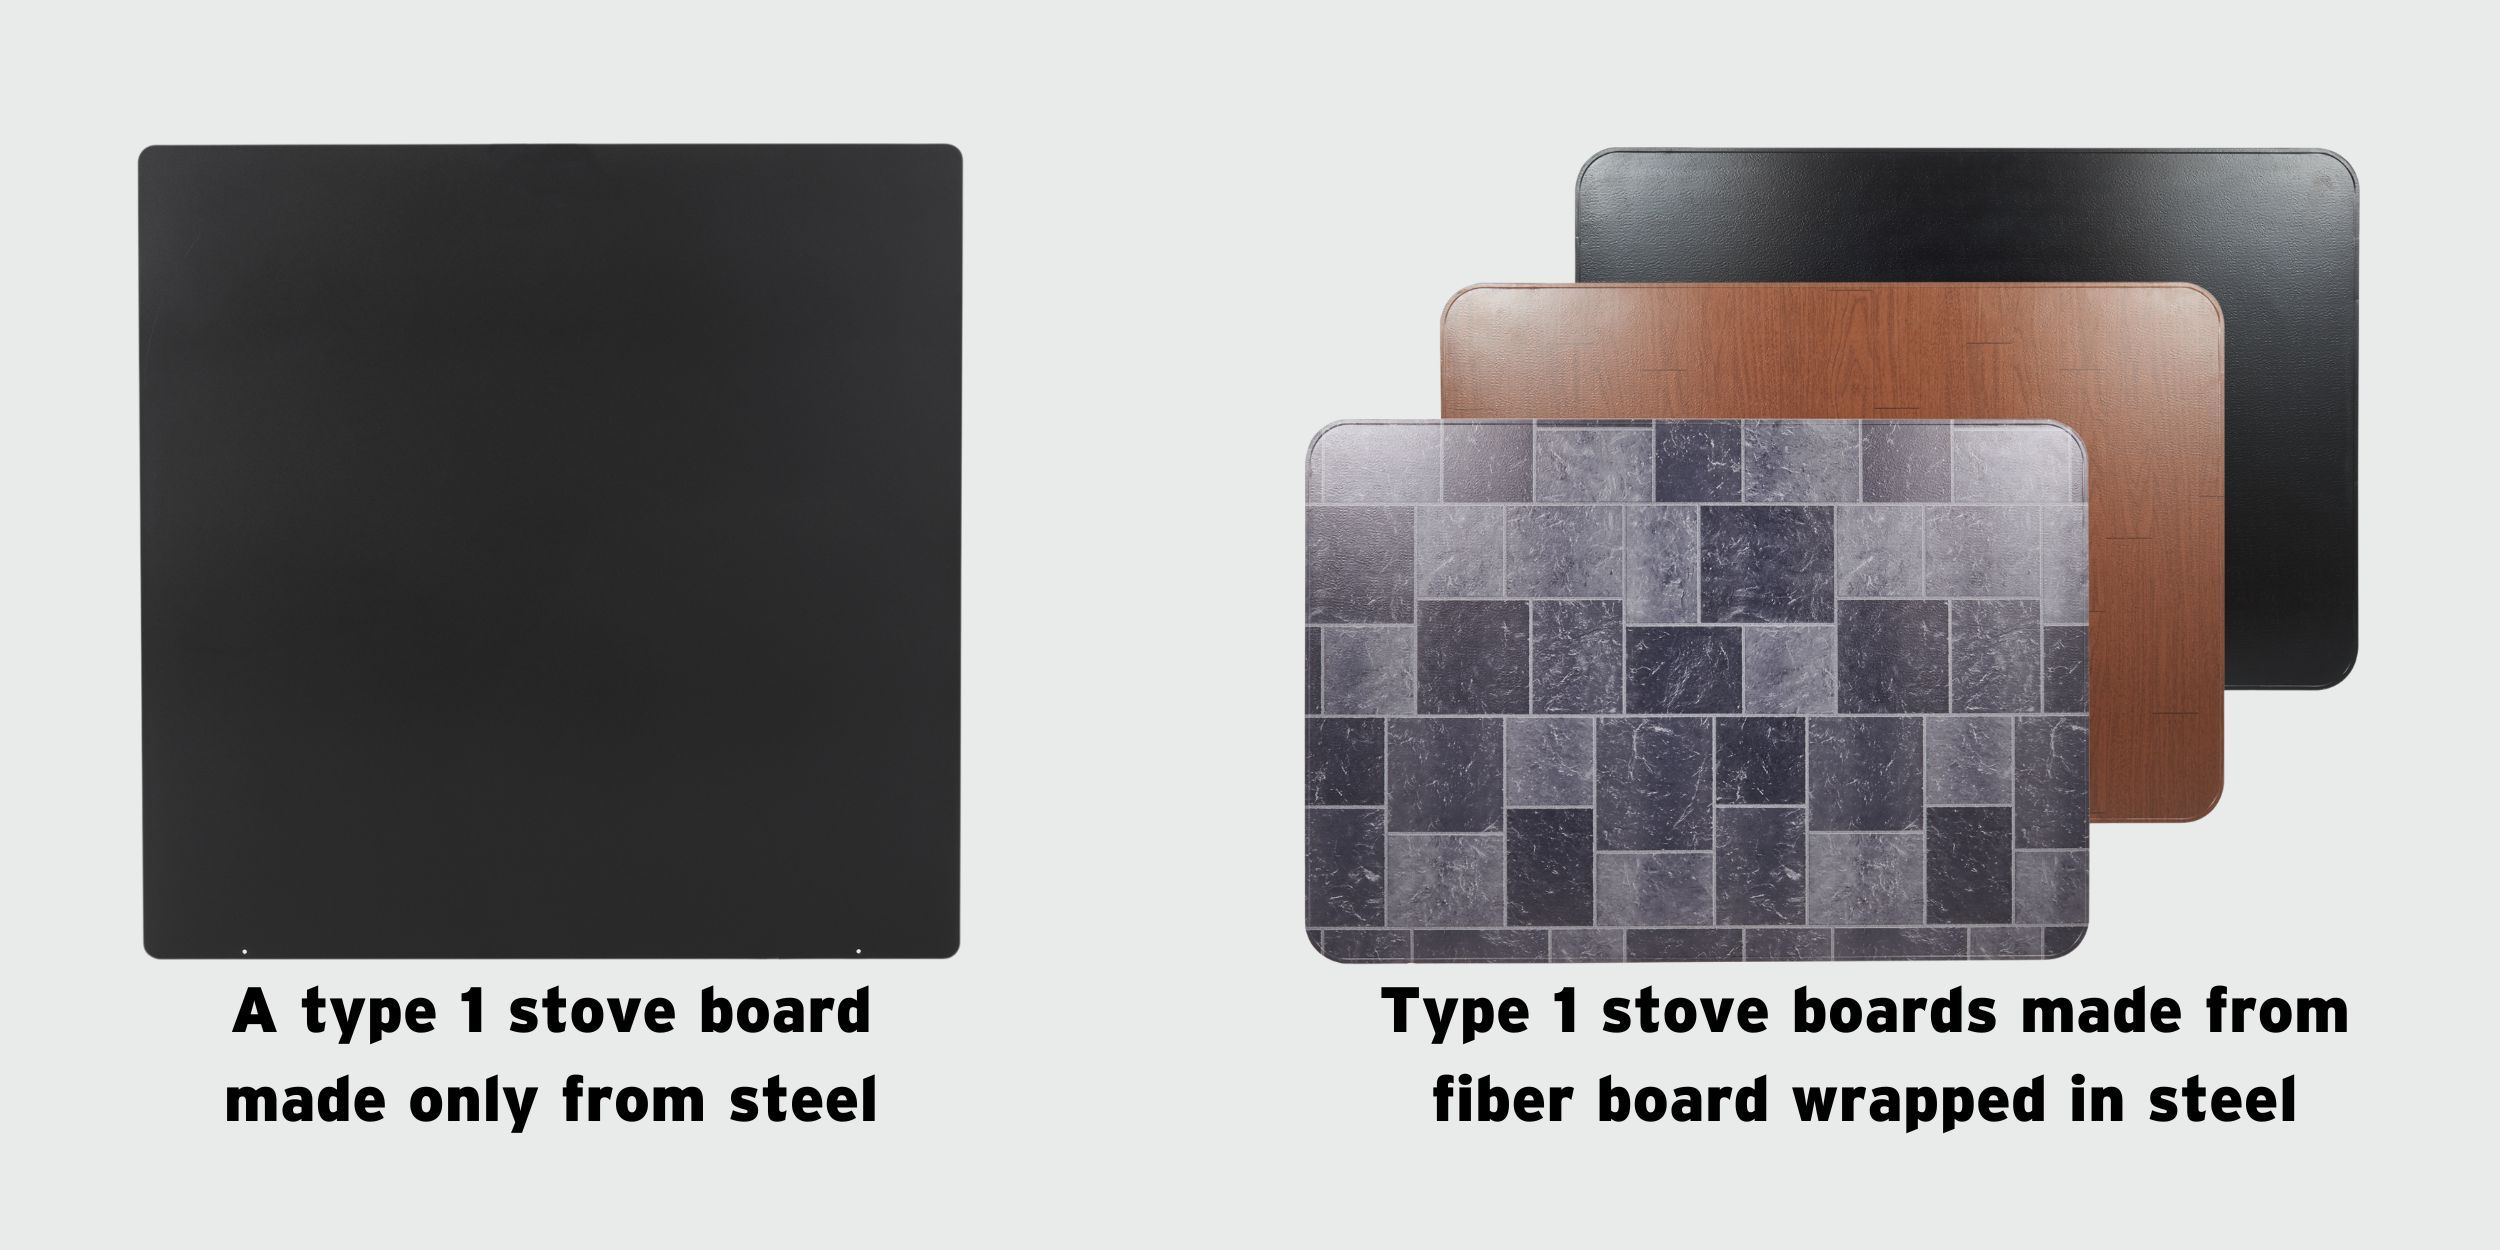 On the left, a type 1 stove board made solely from steel. On the left, three stacked type 1 stove boards made from fiber board-wrapped steel in black, woodgrain, and gray slate colorways.